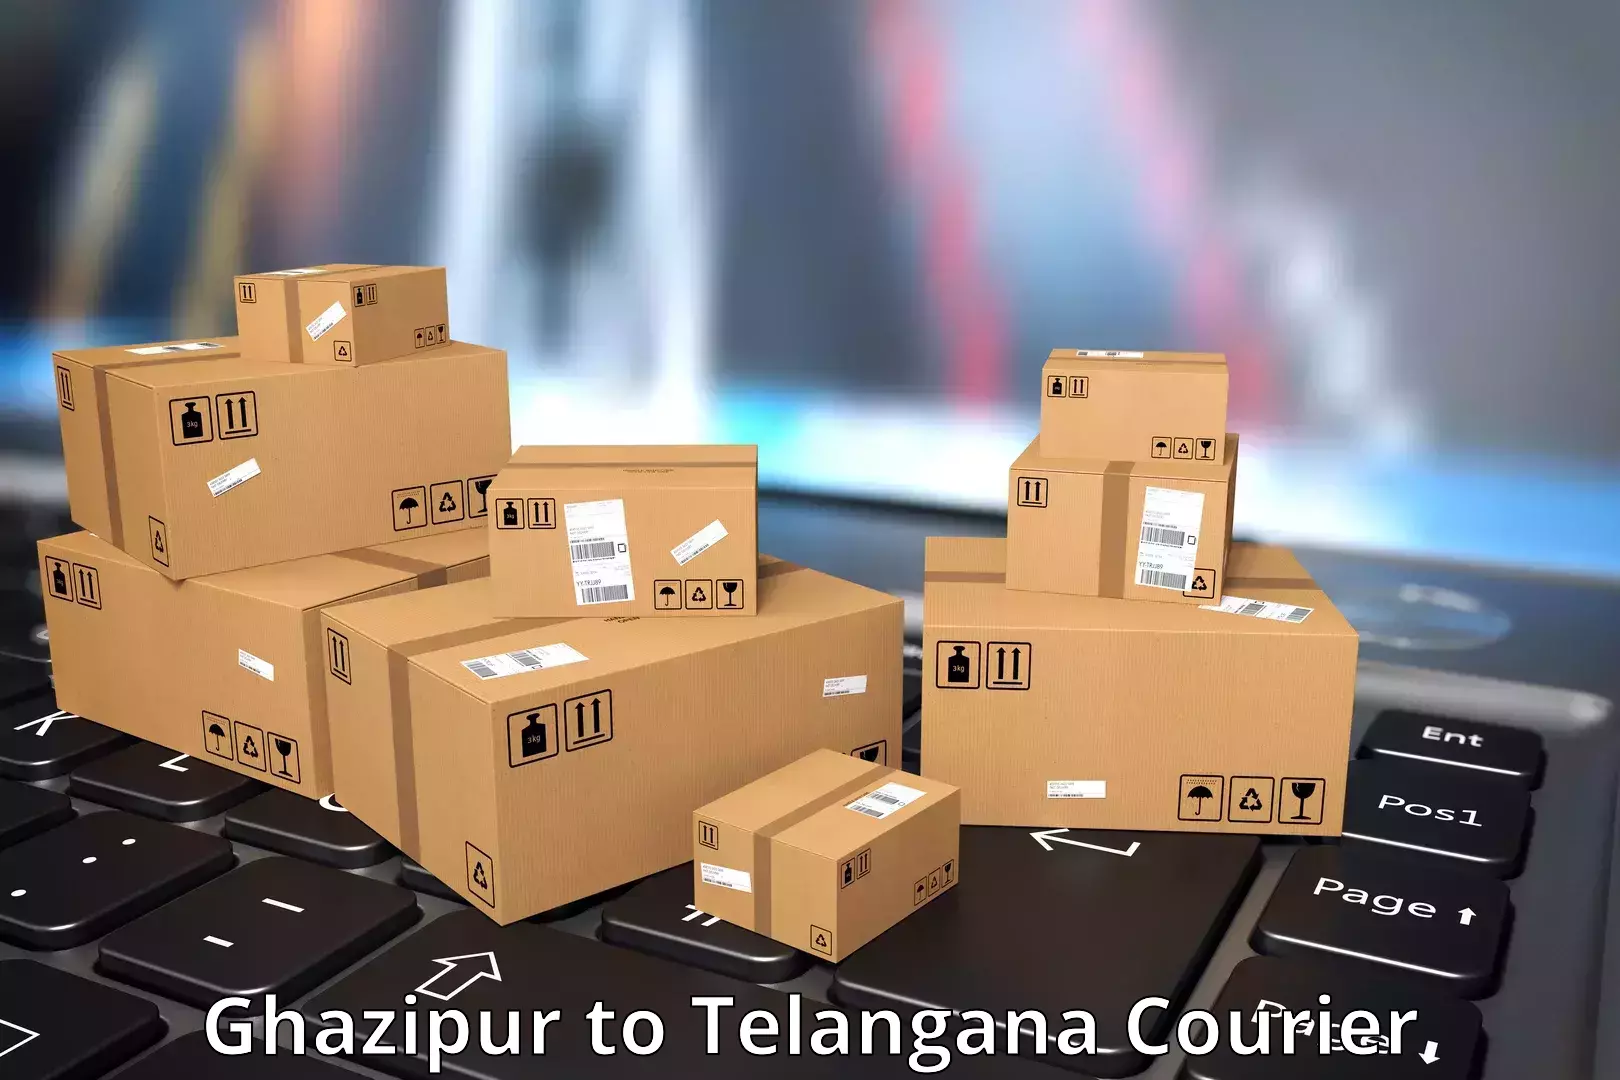 Customer-centric shipping Ghazipur to Madnoor